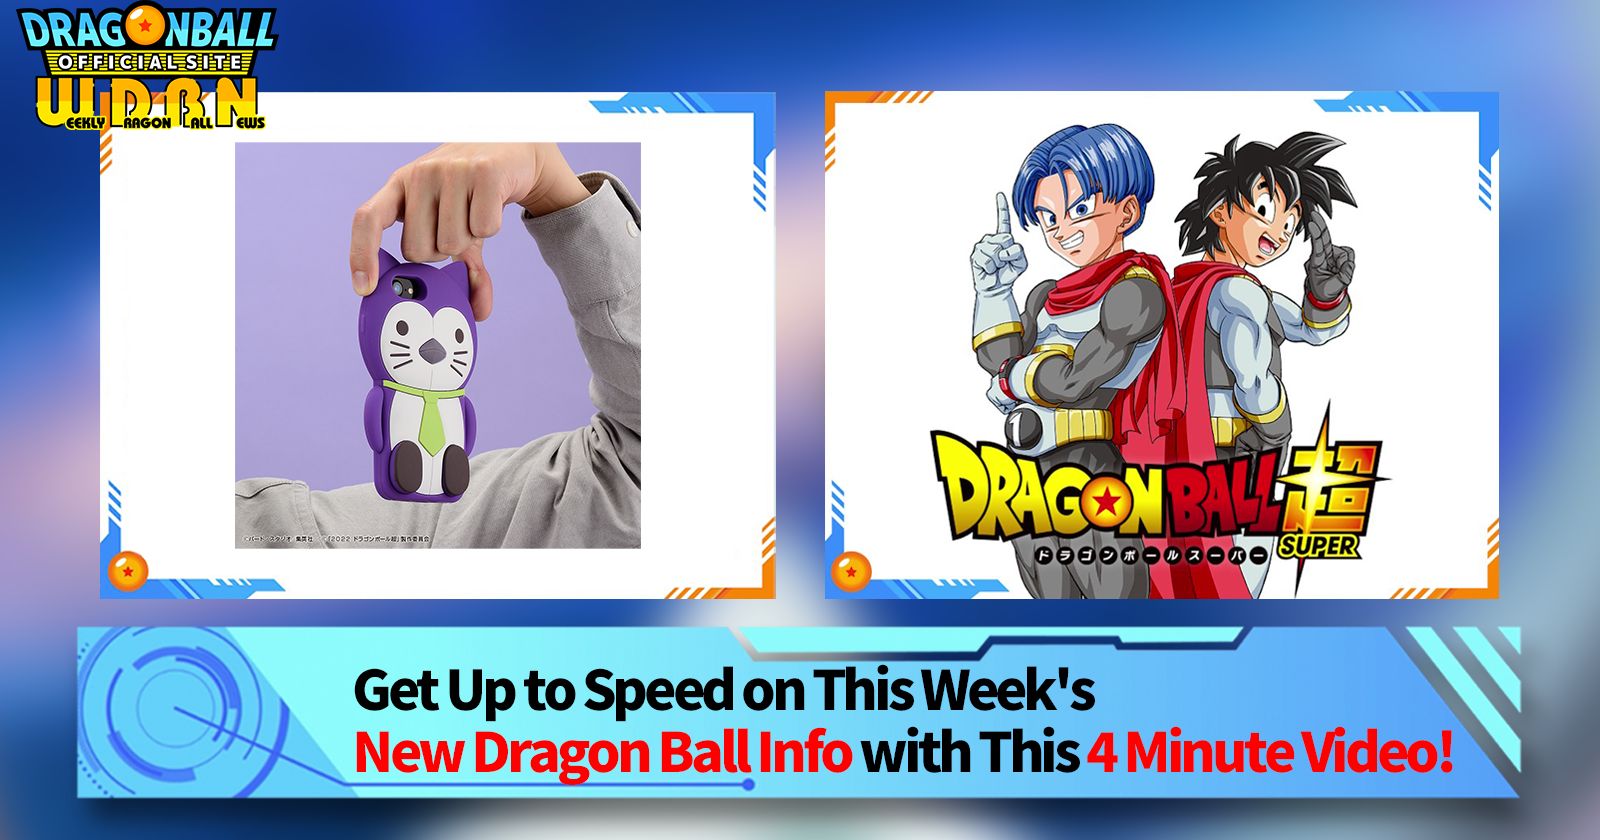 [December 26th] Weekly Dragon Ball News Broadcast!